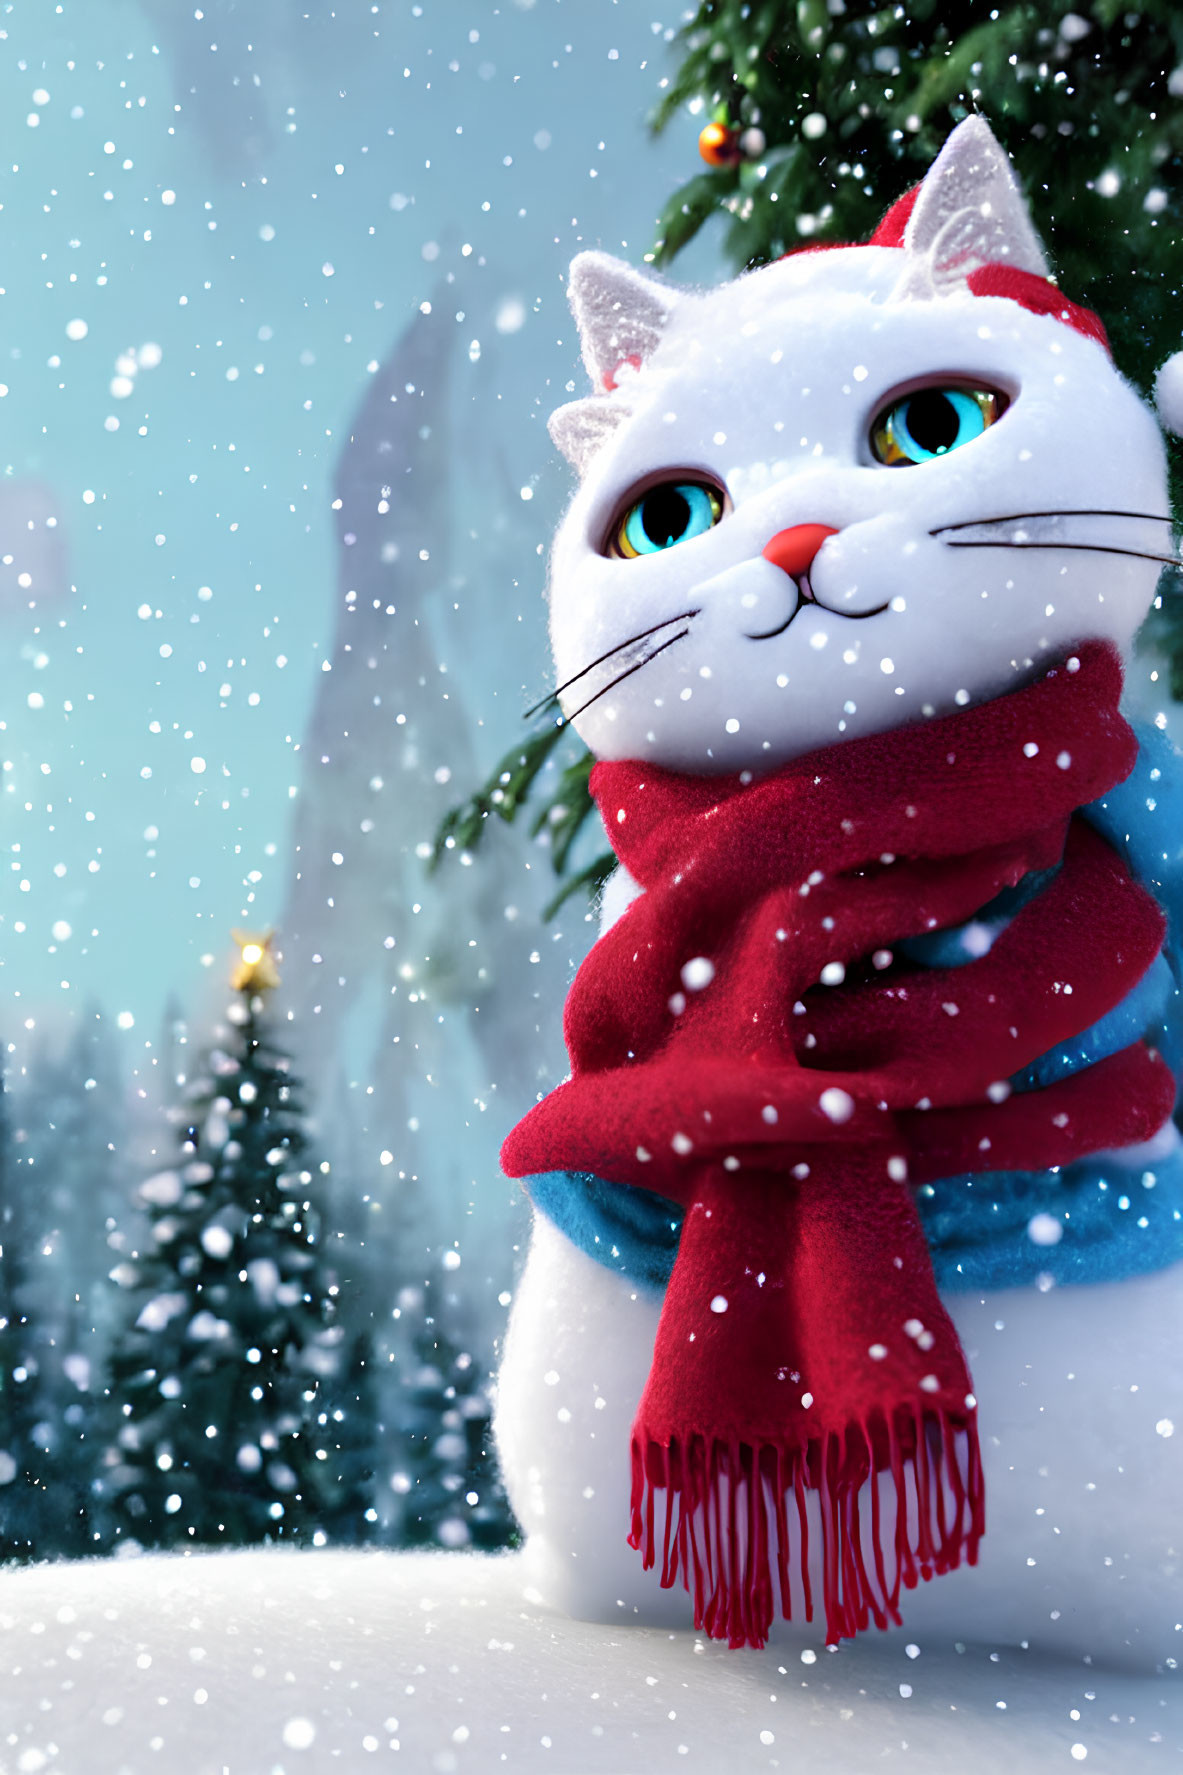 White Cat with Blue Eyes in Snowy 3D Animation